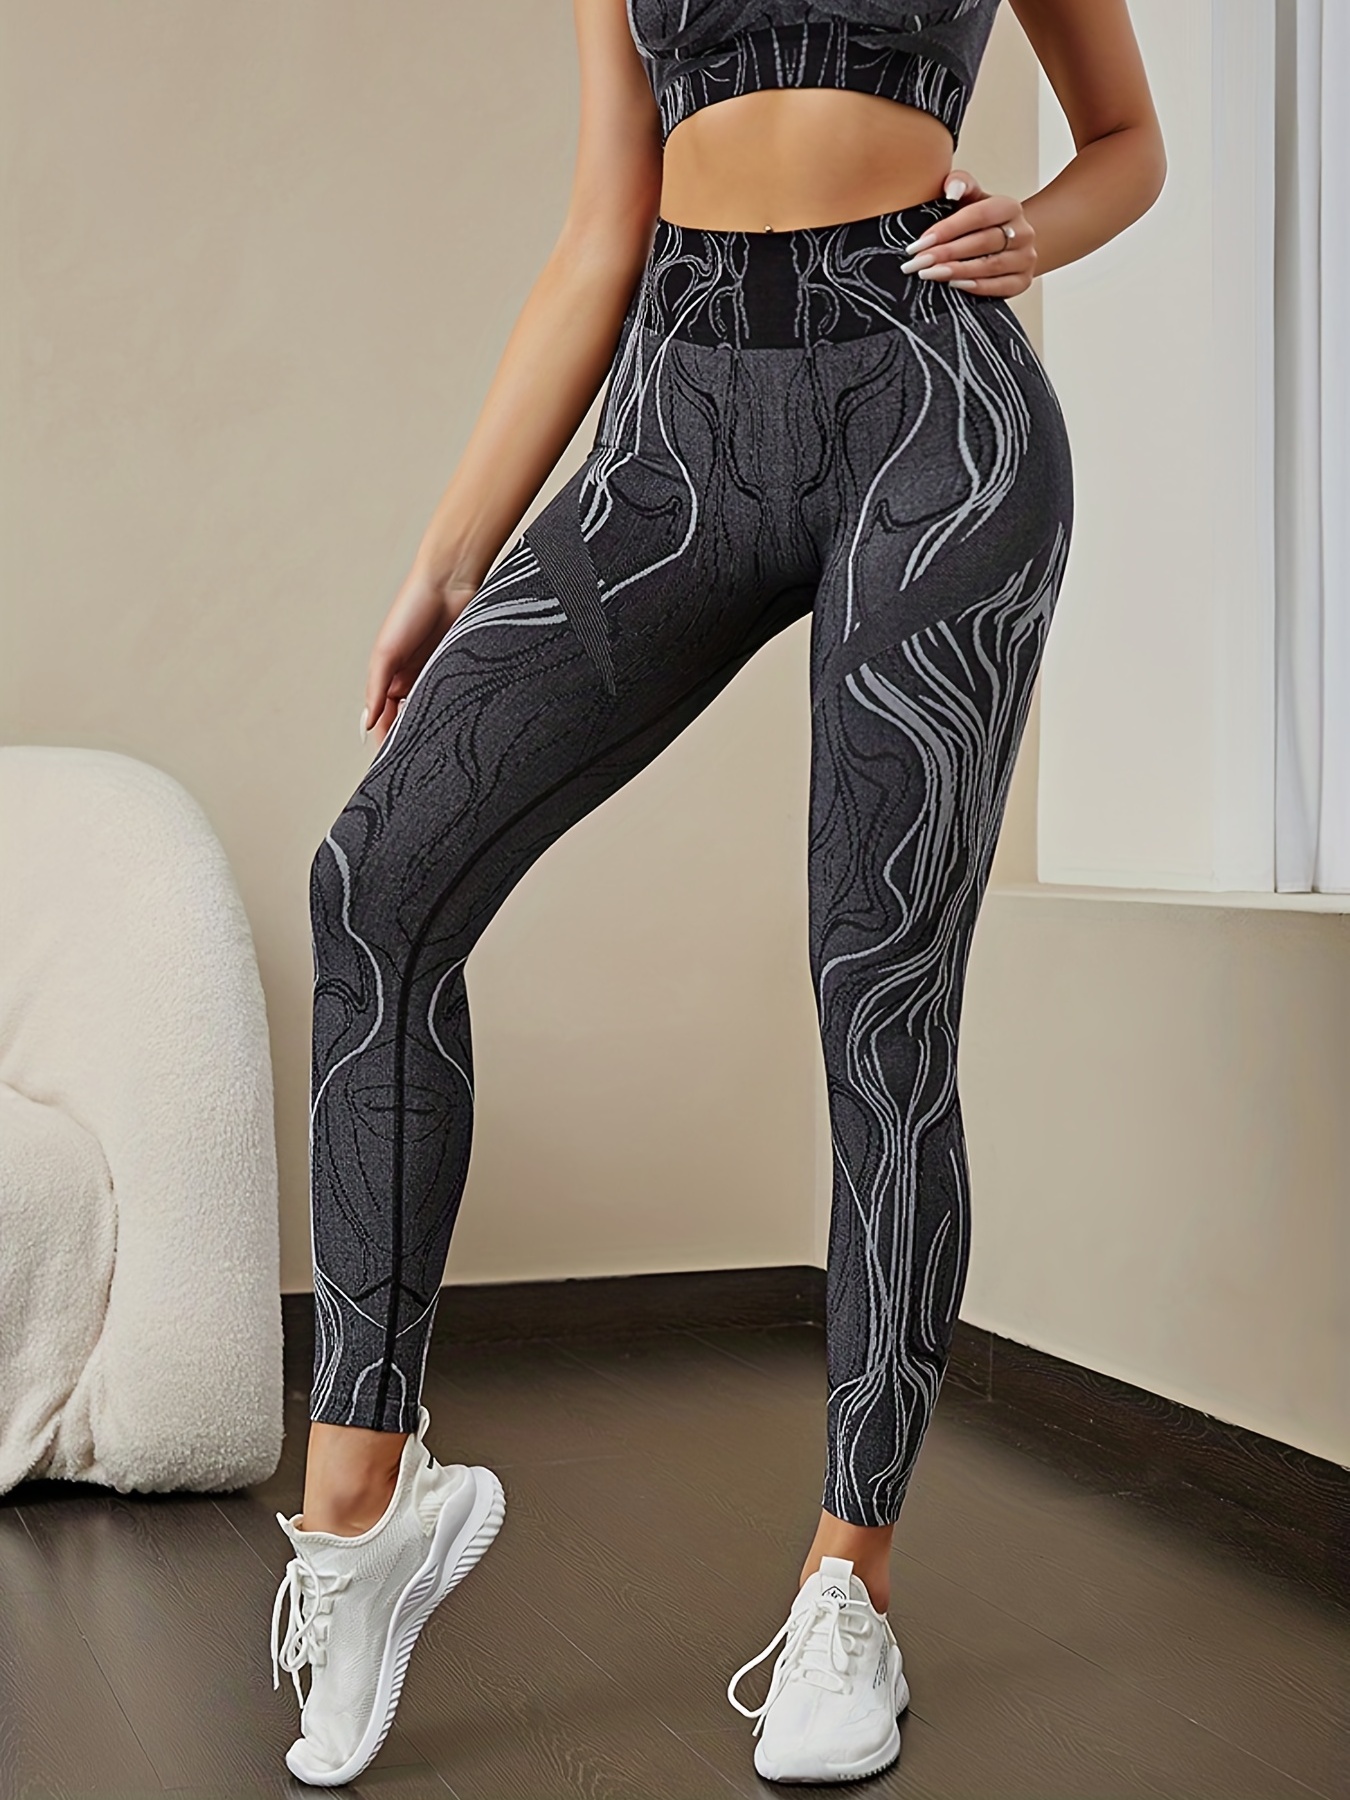  Vegas Strong Women's Yoga Pants High Waisted Workout Leggings  Stretch Athletic Gym Print Long Pants S : Clothing, Shoes & Jewelry